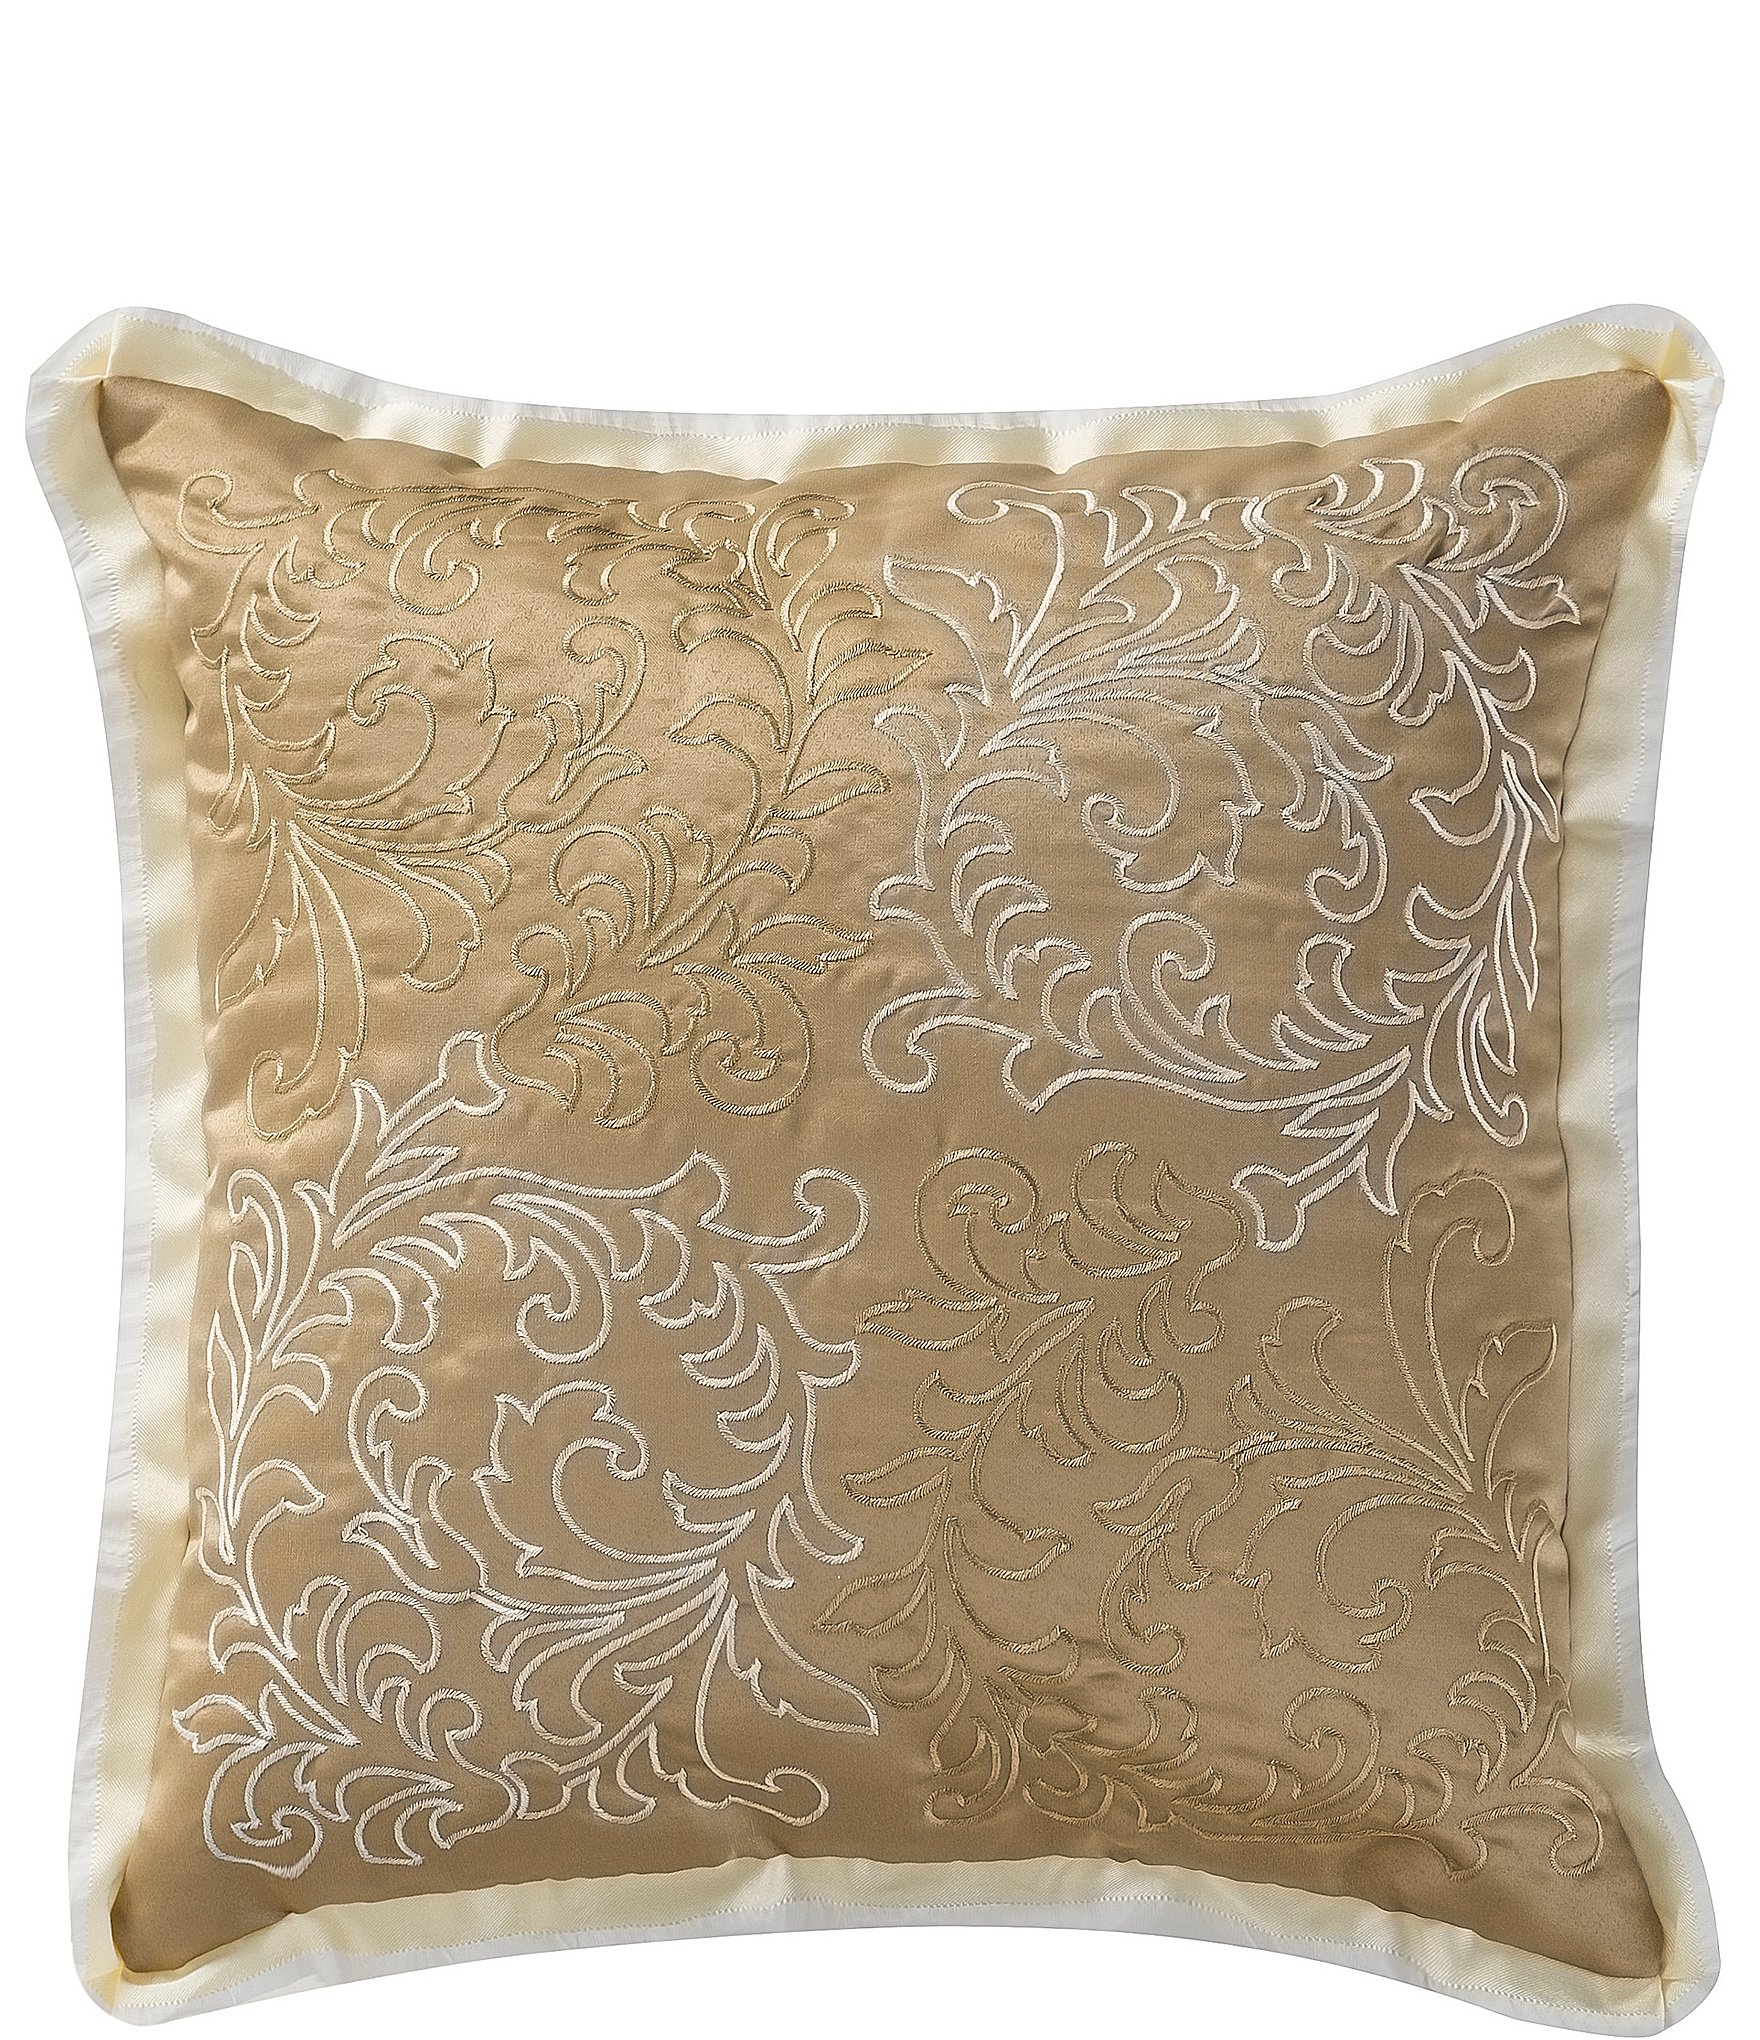 Waterford Ansonia Ribbon-Trimmed Scroll-Embroidered Square Pillow  Dillard's